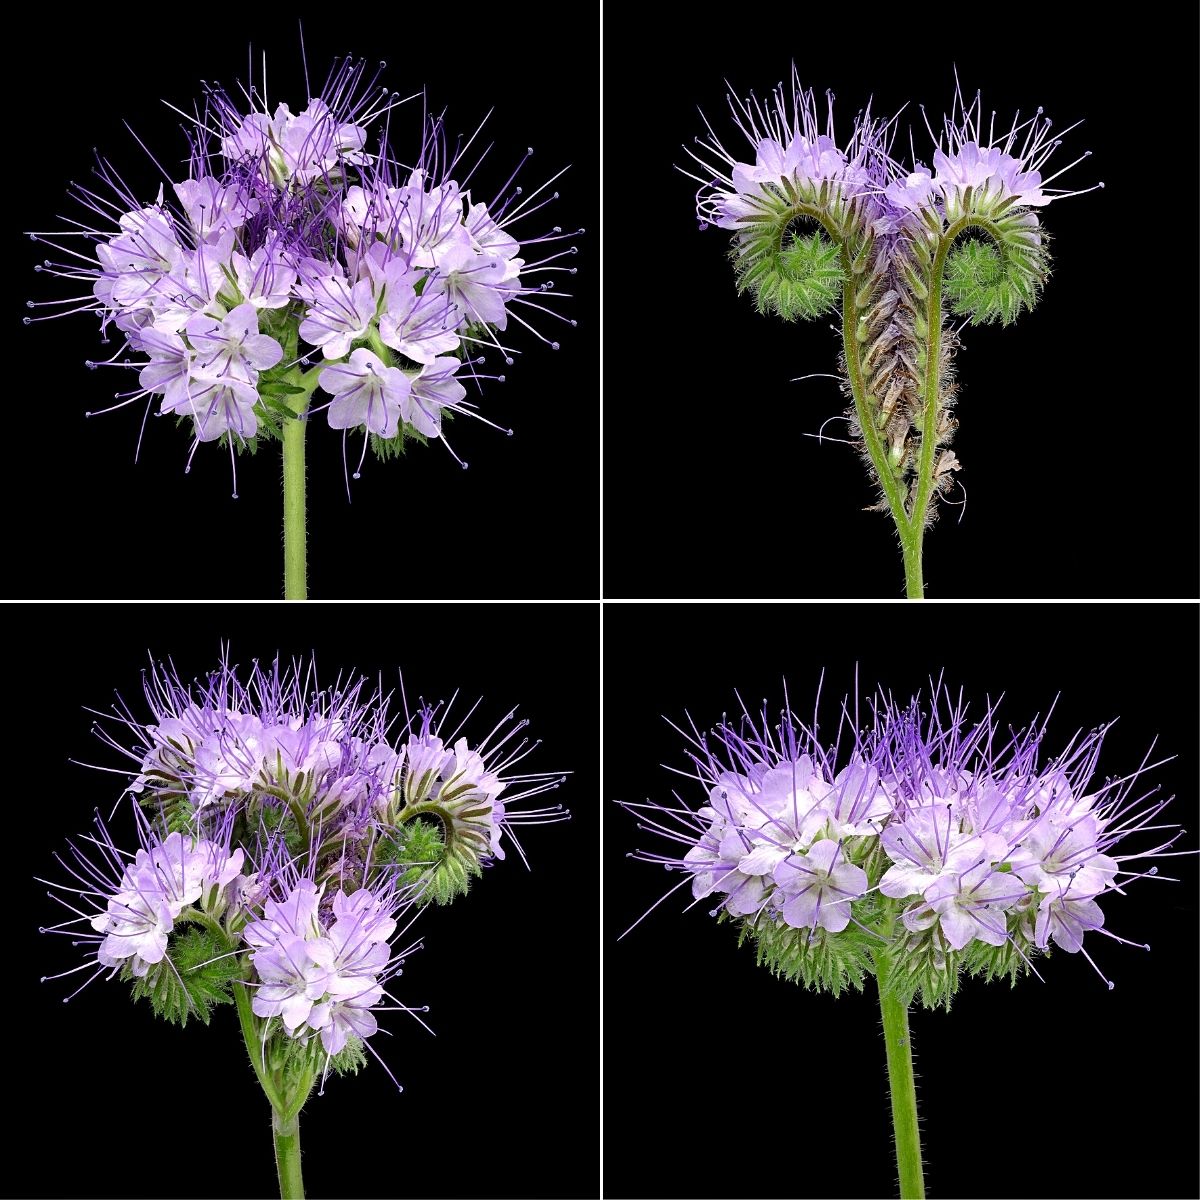 Phacelia Is the Precious Possession of Grower Maurits Keppel